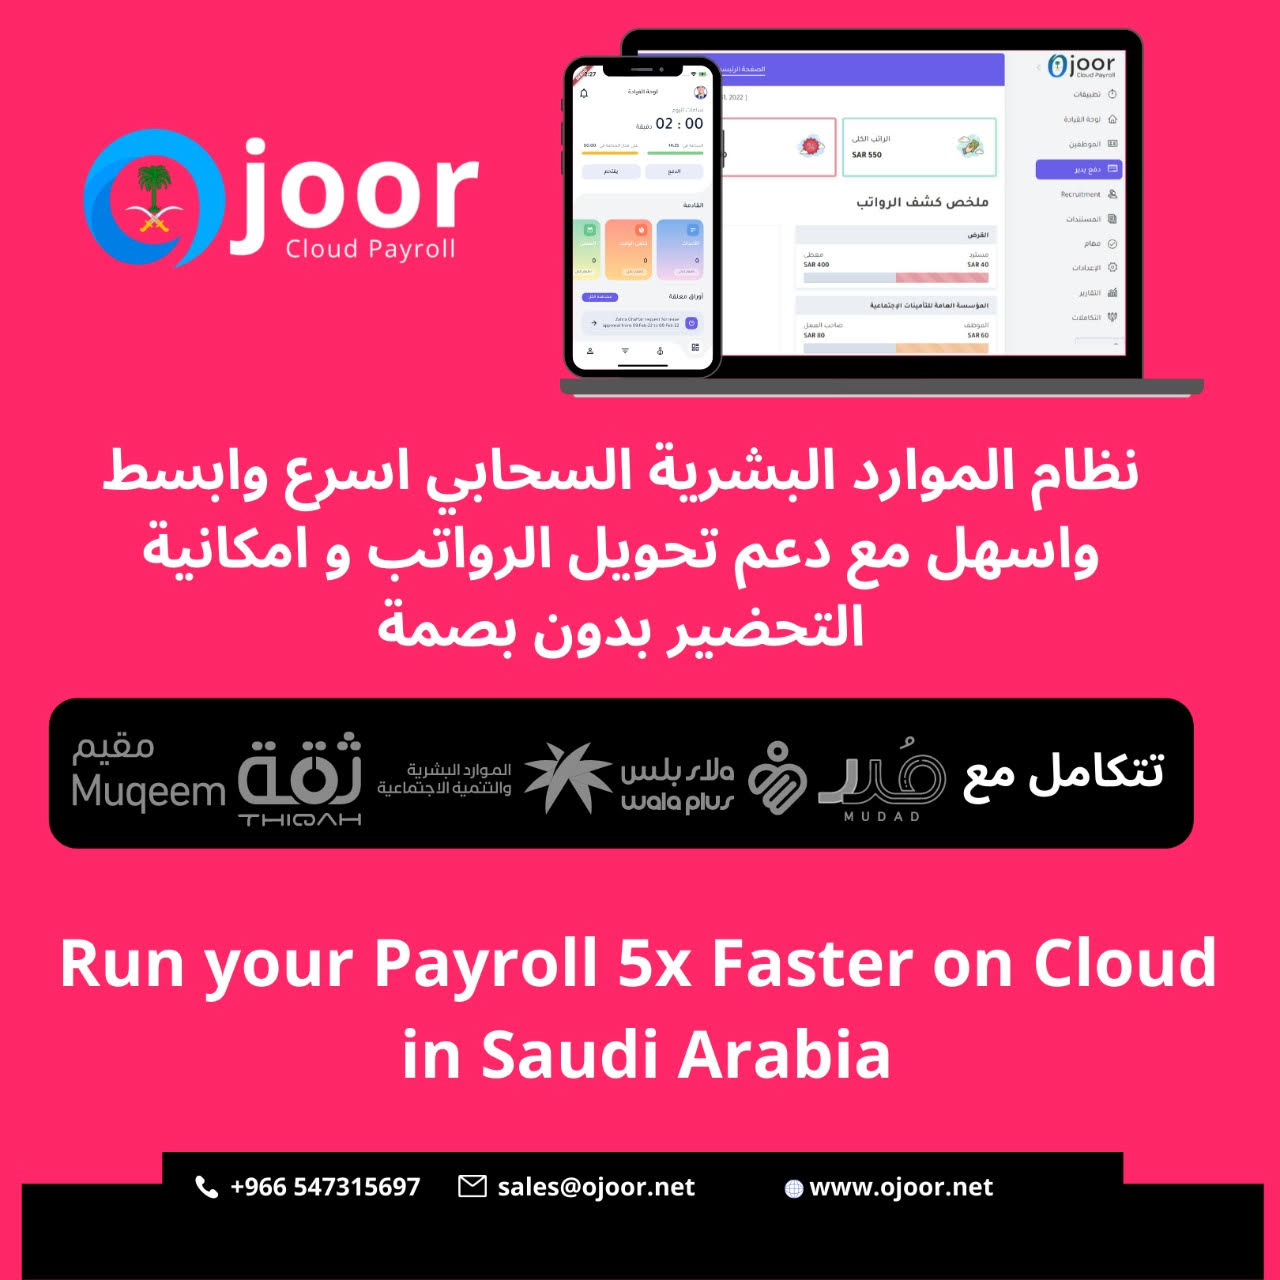 Track & Manage overtime pay with Payroll System in Saudi Arabia